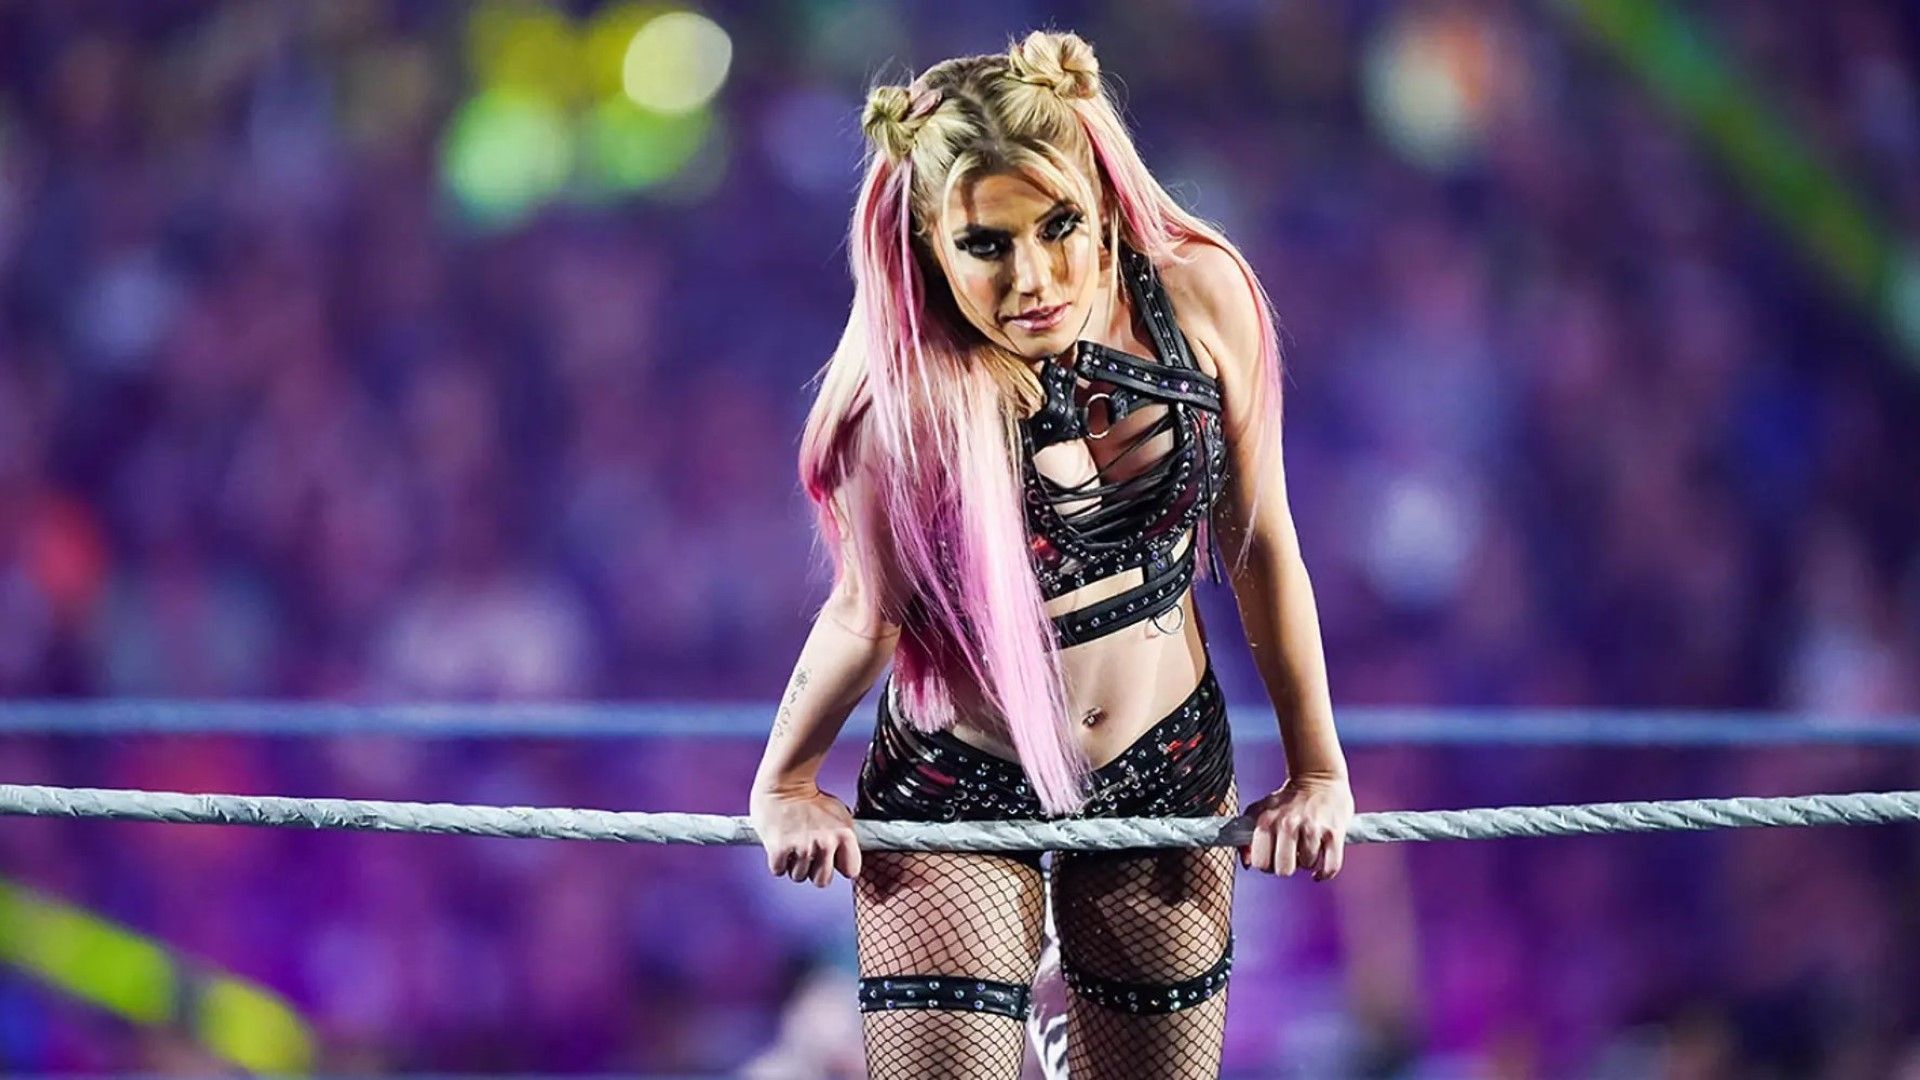 Alexa Bliss poses on the ropes in a WWE ring